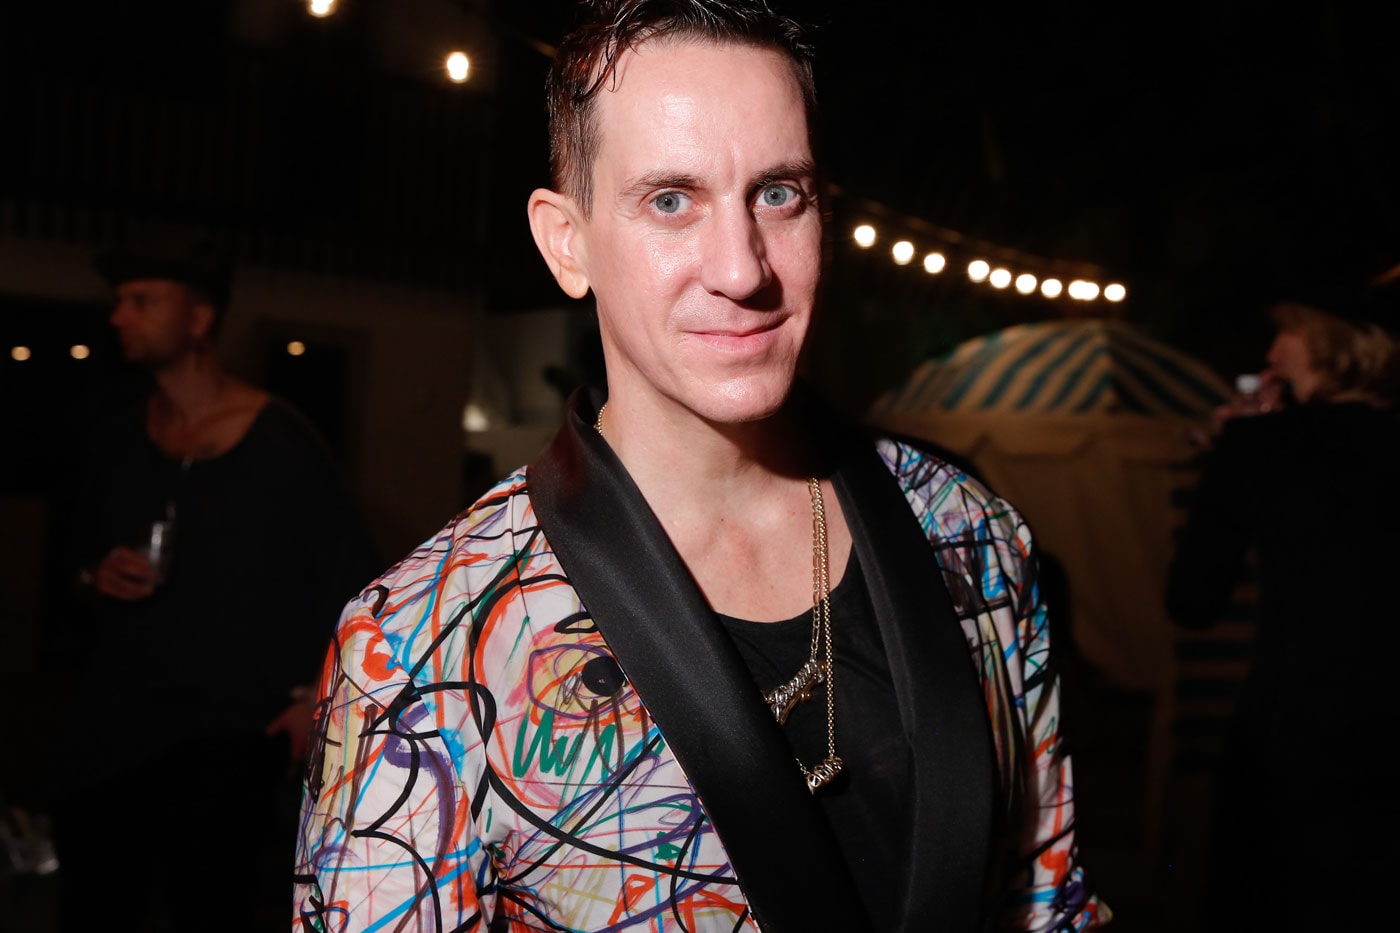 Jeremy Scott: “I’m the Person Who Brought Kanye West to adidas”